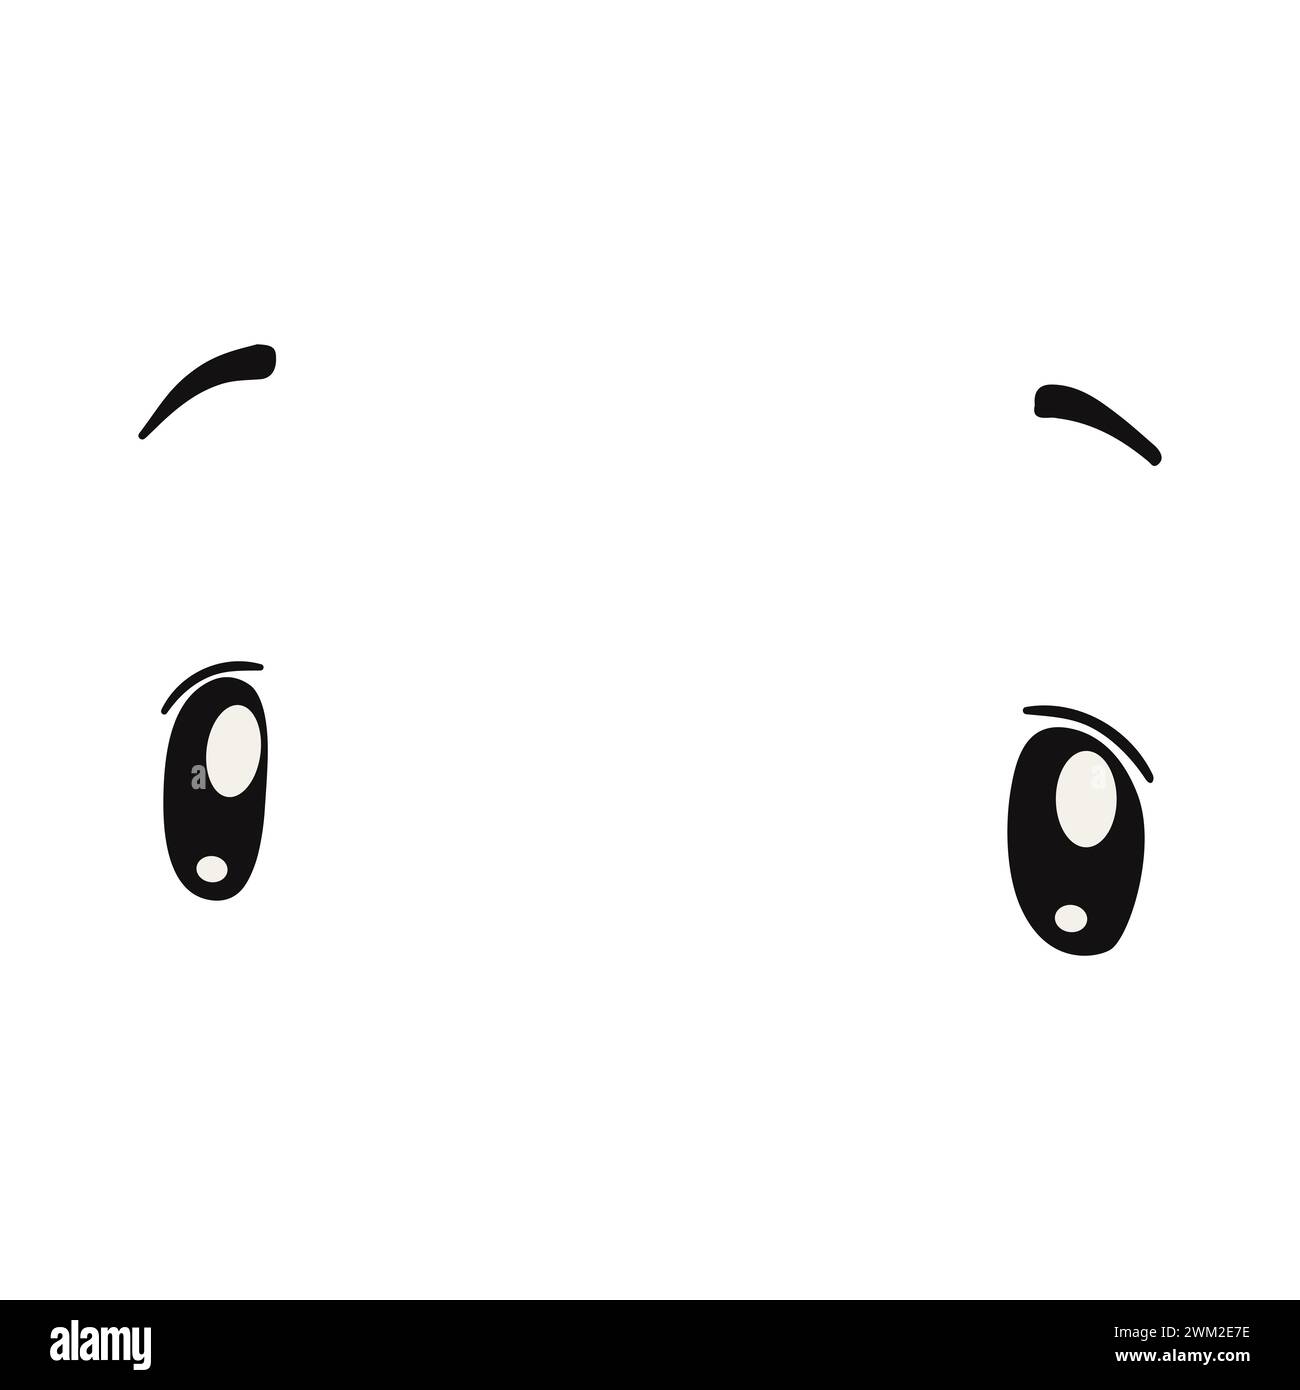 Black And White Anime Eyes With Eyebrows Stock Vector